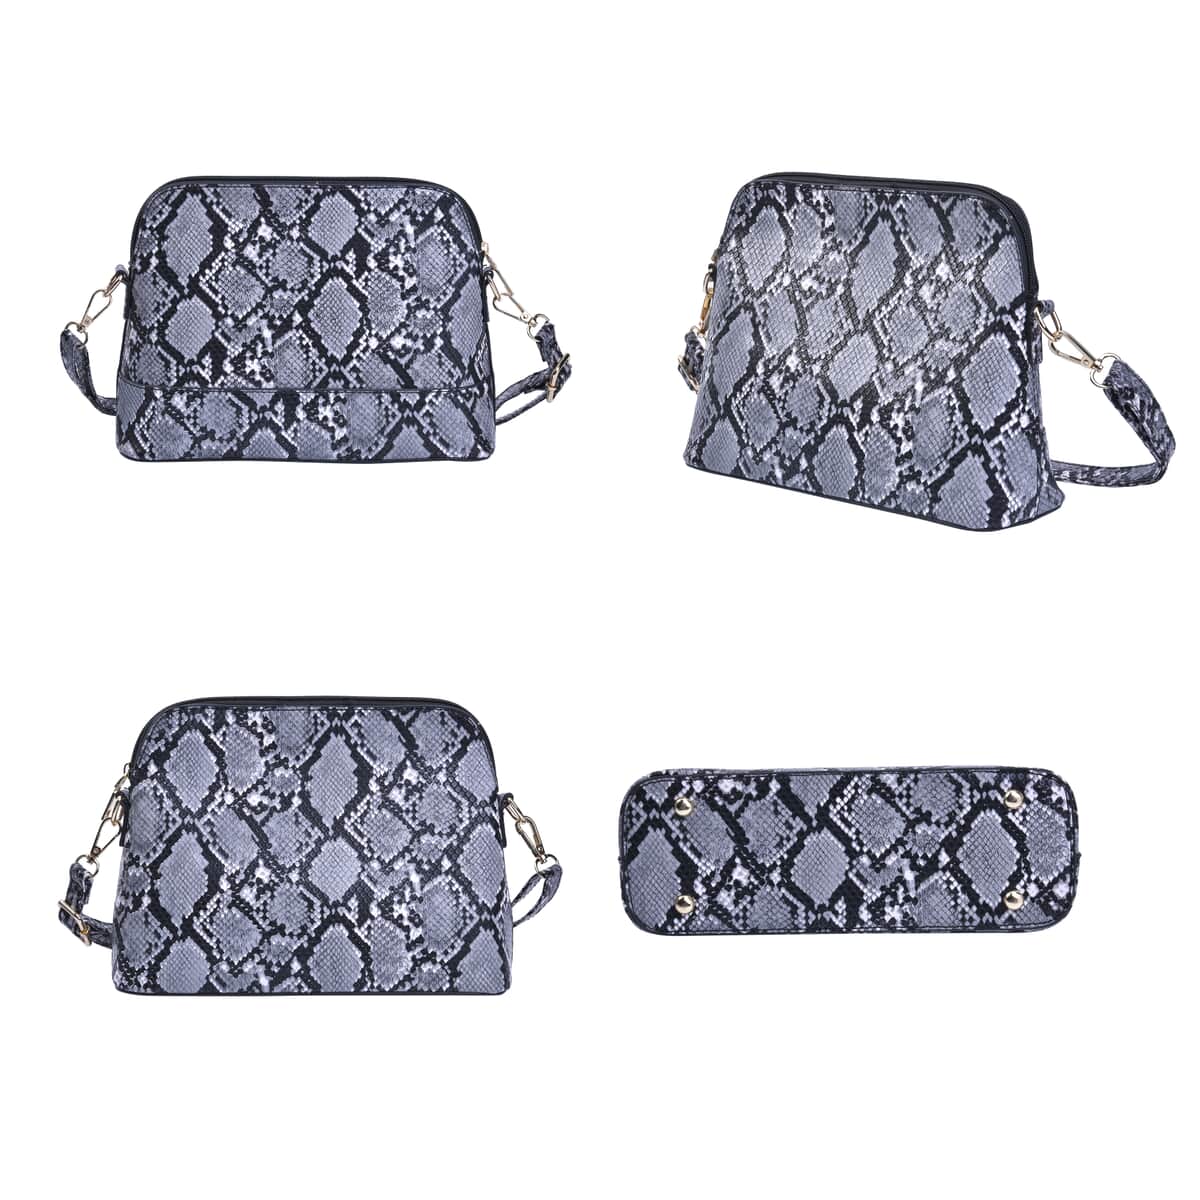 PASSAGE Black Snake Skin Pattern Faux Leather Totebag (13"x4"x10.5"), Crossbody Bag (10.24"x3.15"x7.5"), Clutch Bag (9.84"x6.3") and Wallet (7.87"x4") image number 4